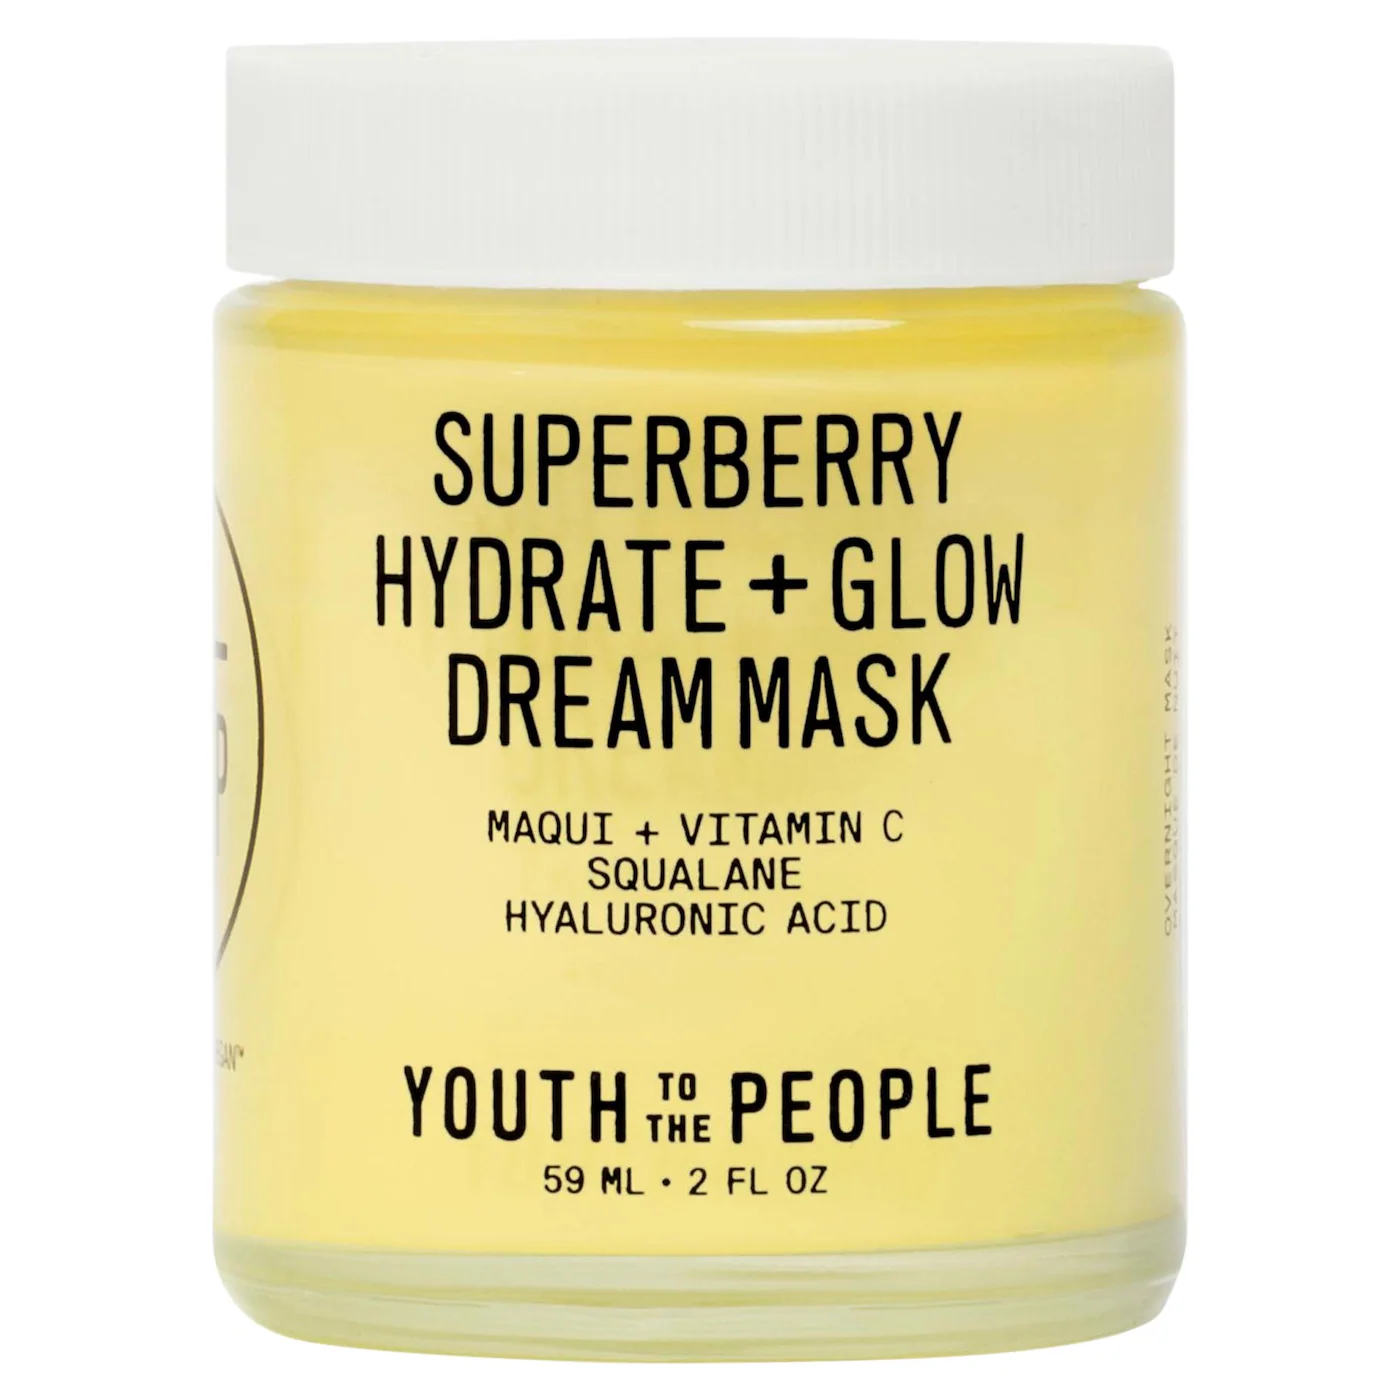 Youth To The People
Superberry Hydrate + Glow Dream Night Cream + Mask with Vitamin C